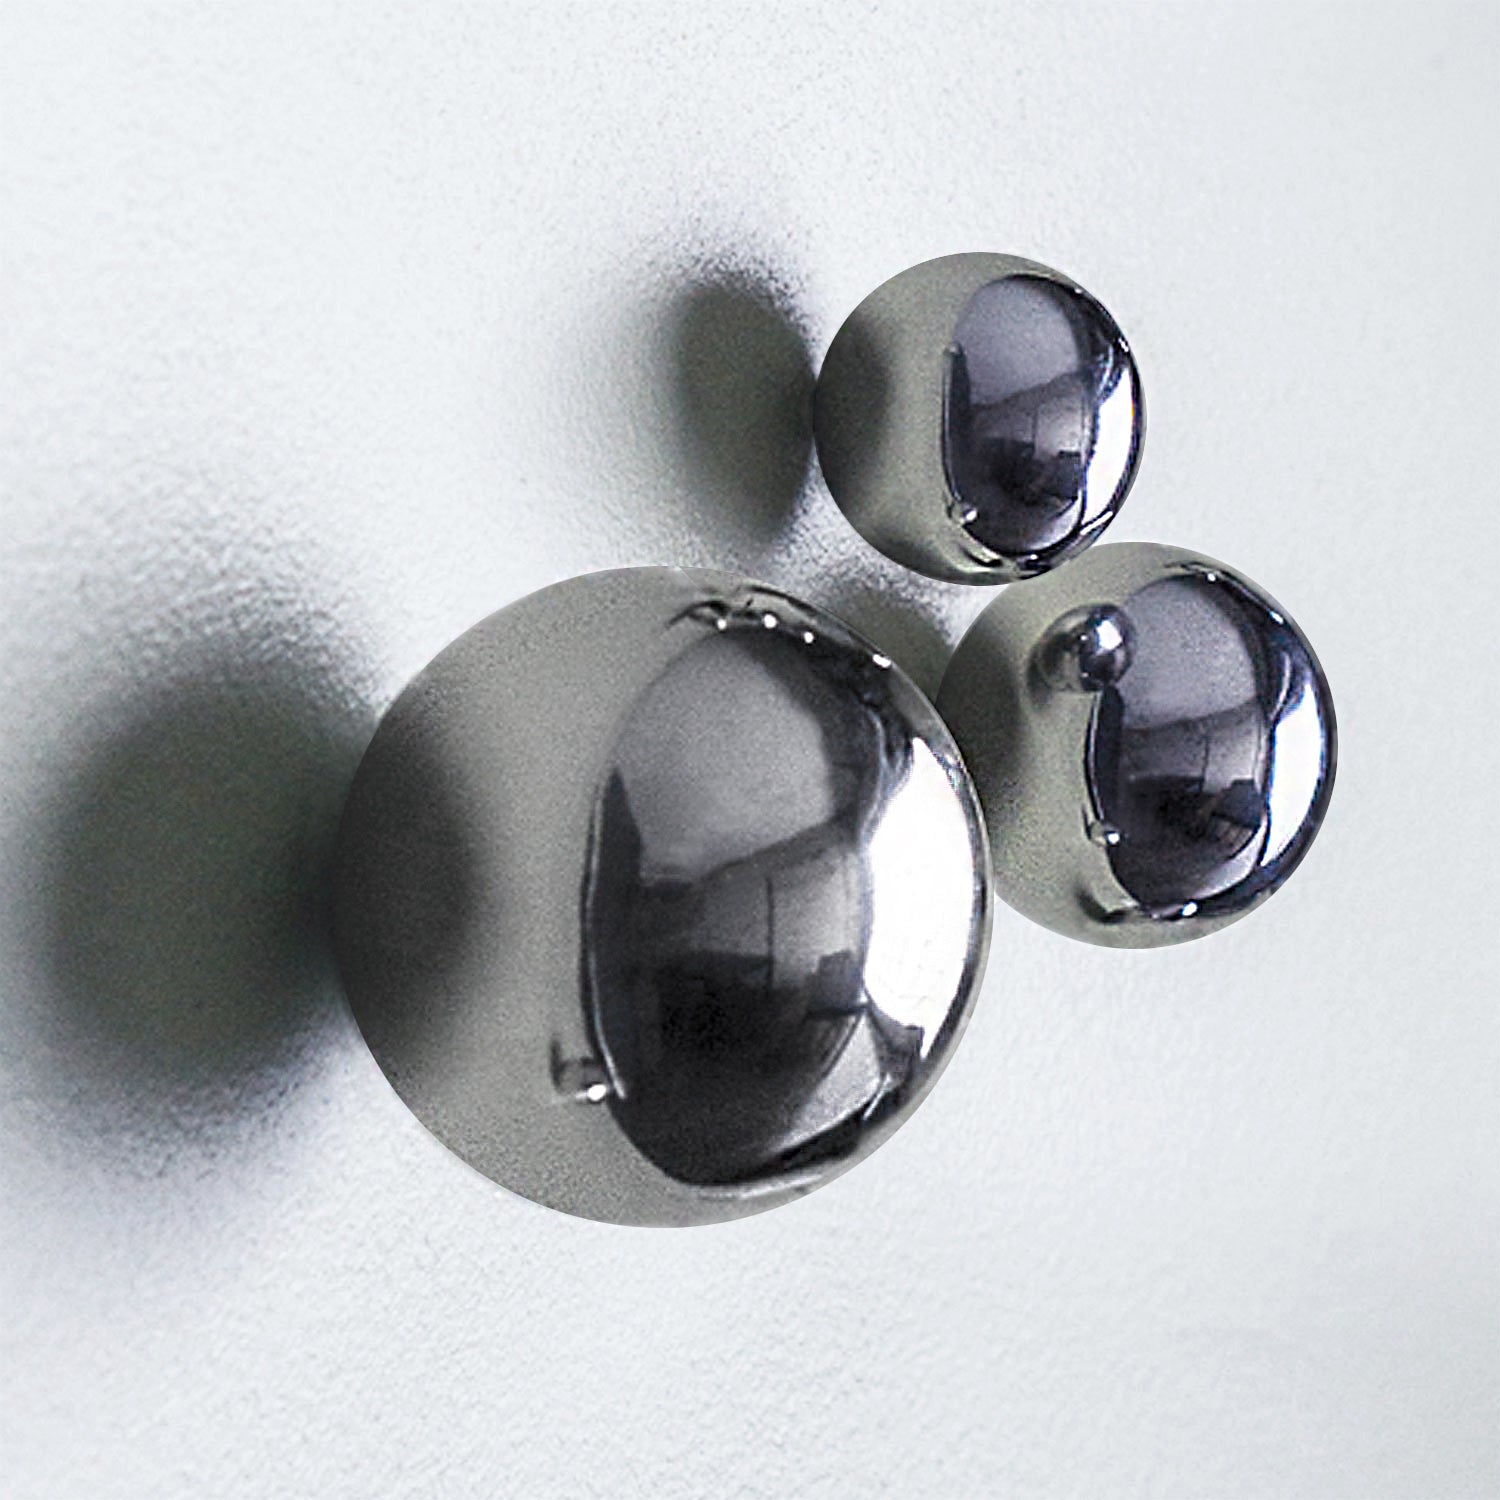 Wall Play™: Orb, Stainless, Set/10